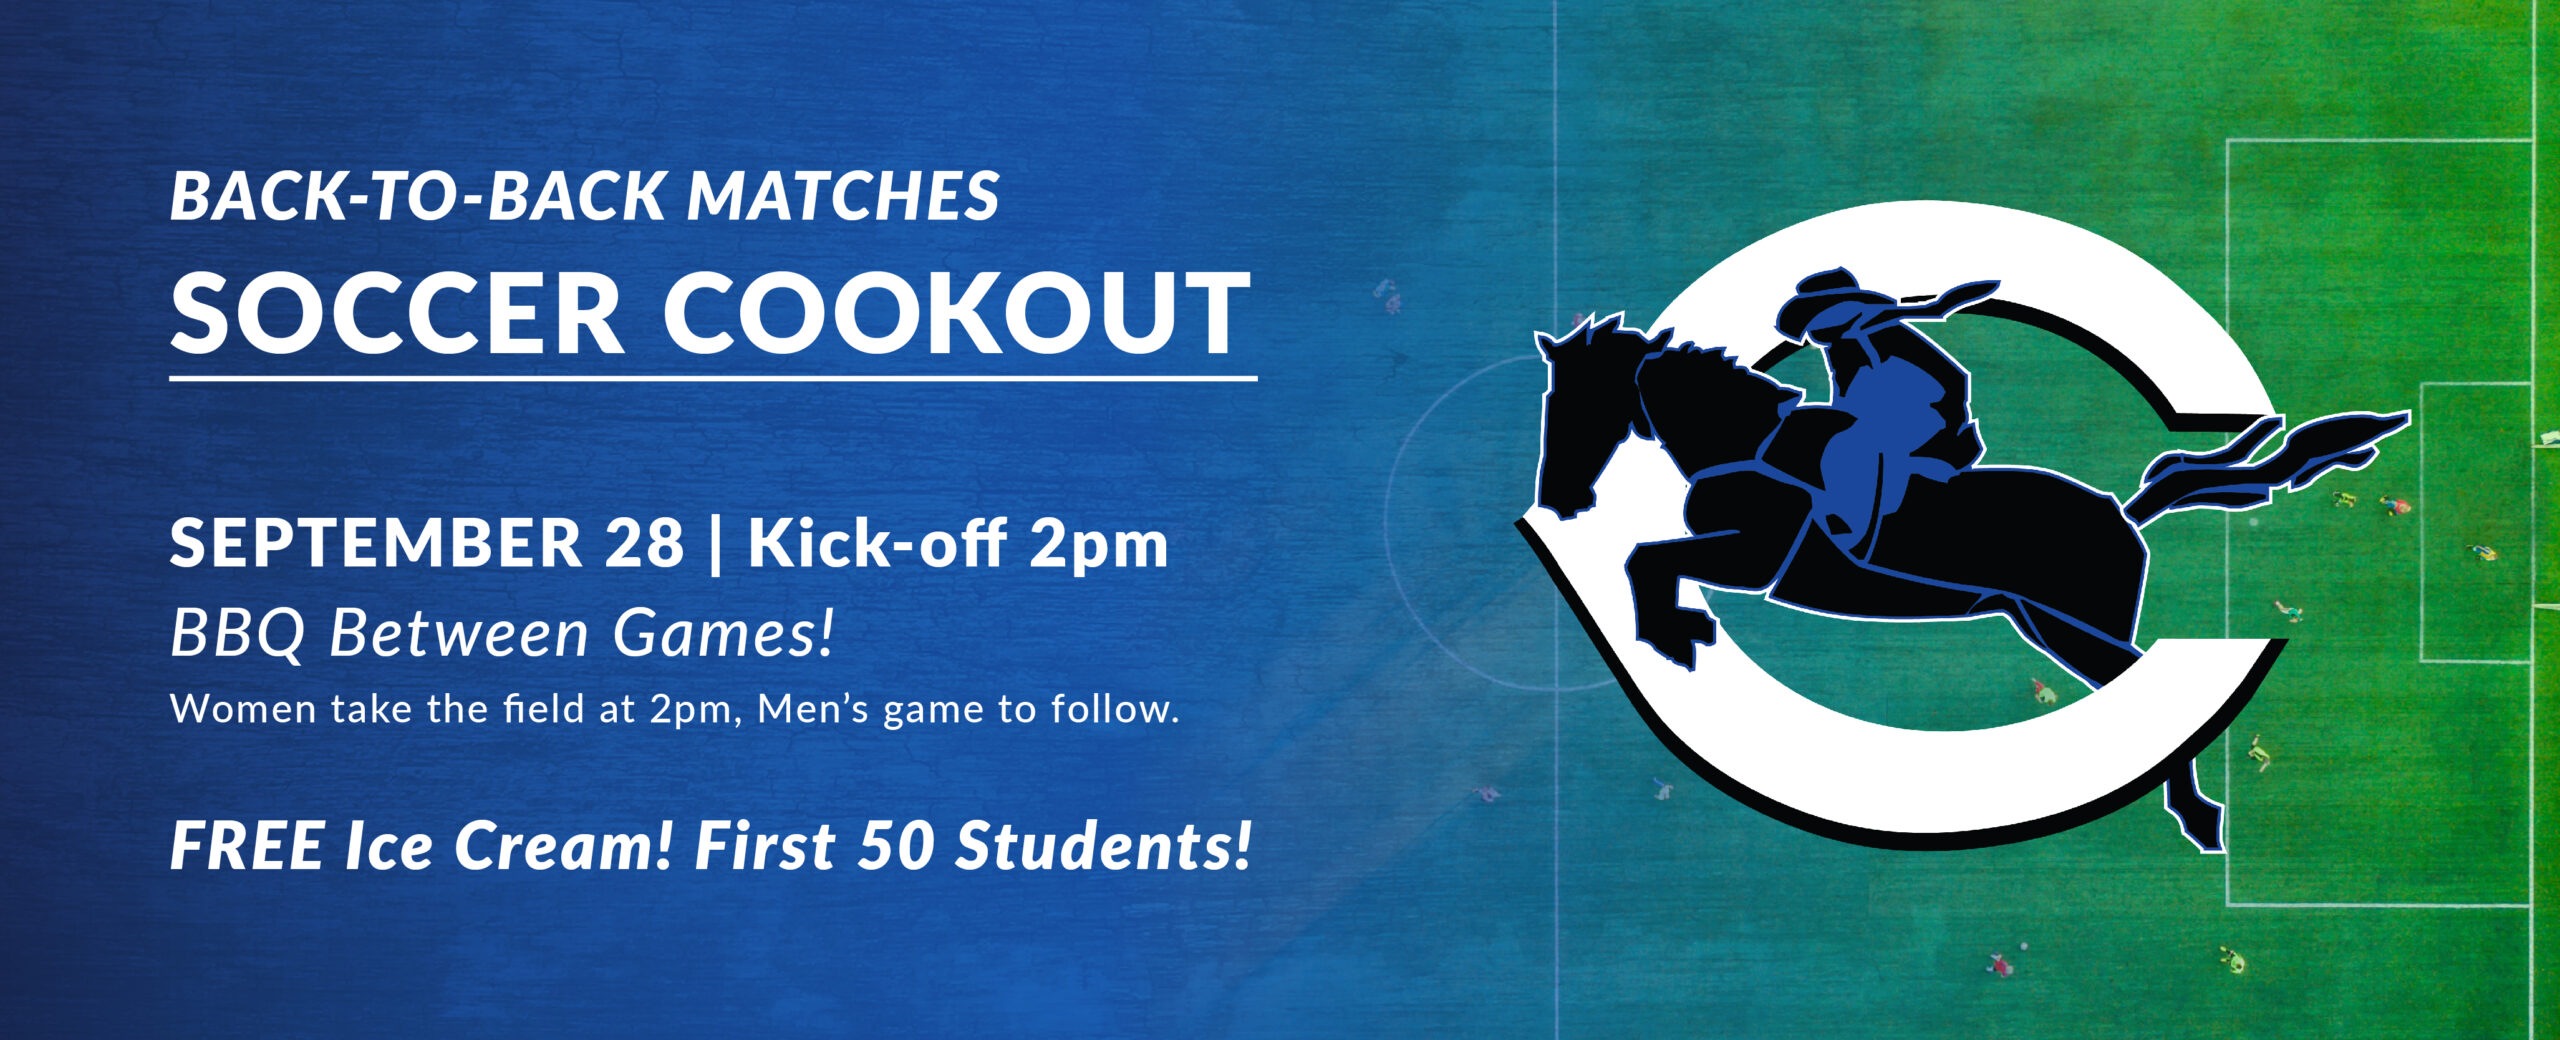 Back-to-Back Matches! Soccer Cookout, September 28, Kick-off 2pm. Free Ice Cream to first 50 students